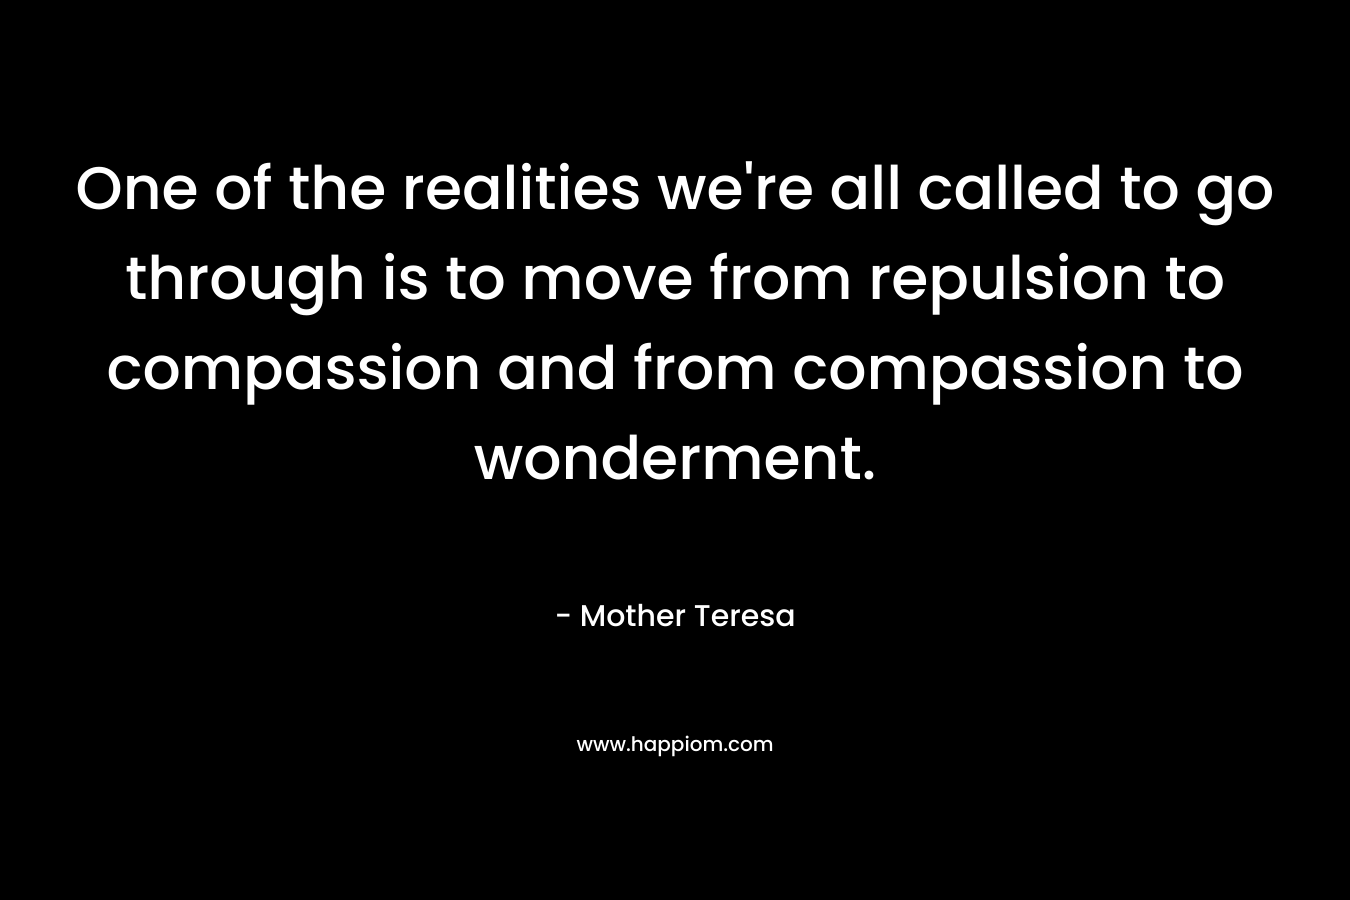 One of the realities we're all called to go through is to move from repulsion to compassion and from compassion to wonderment.